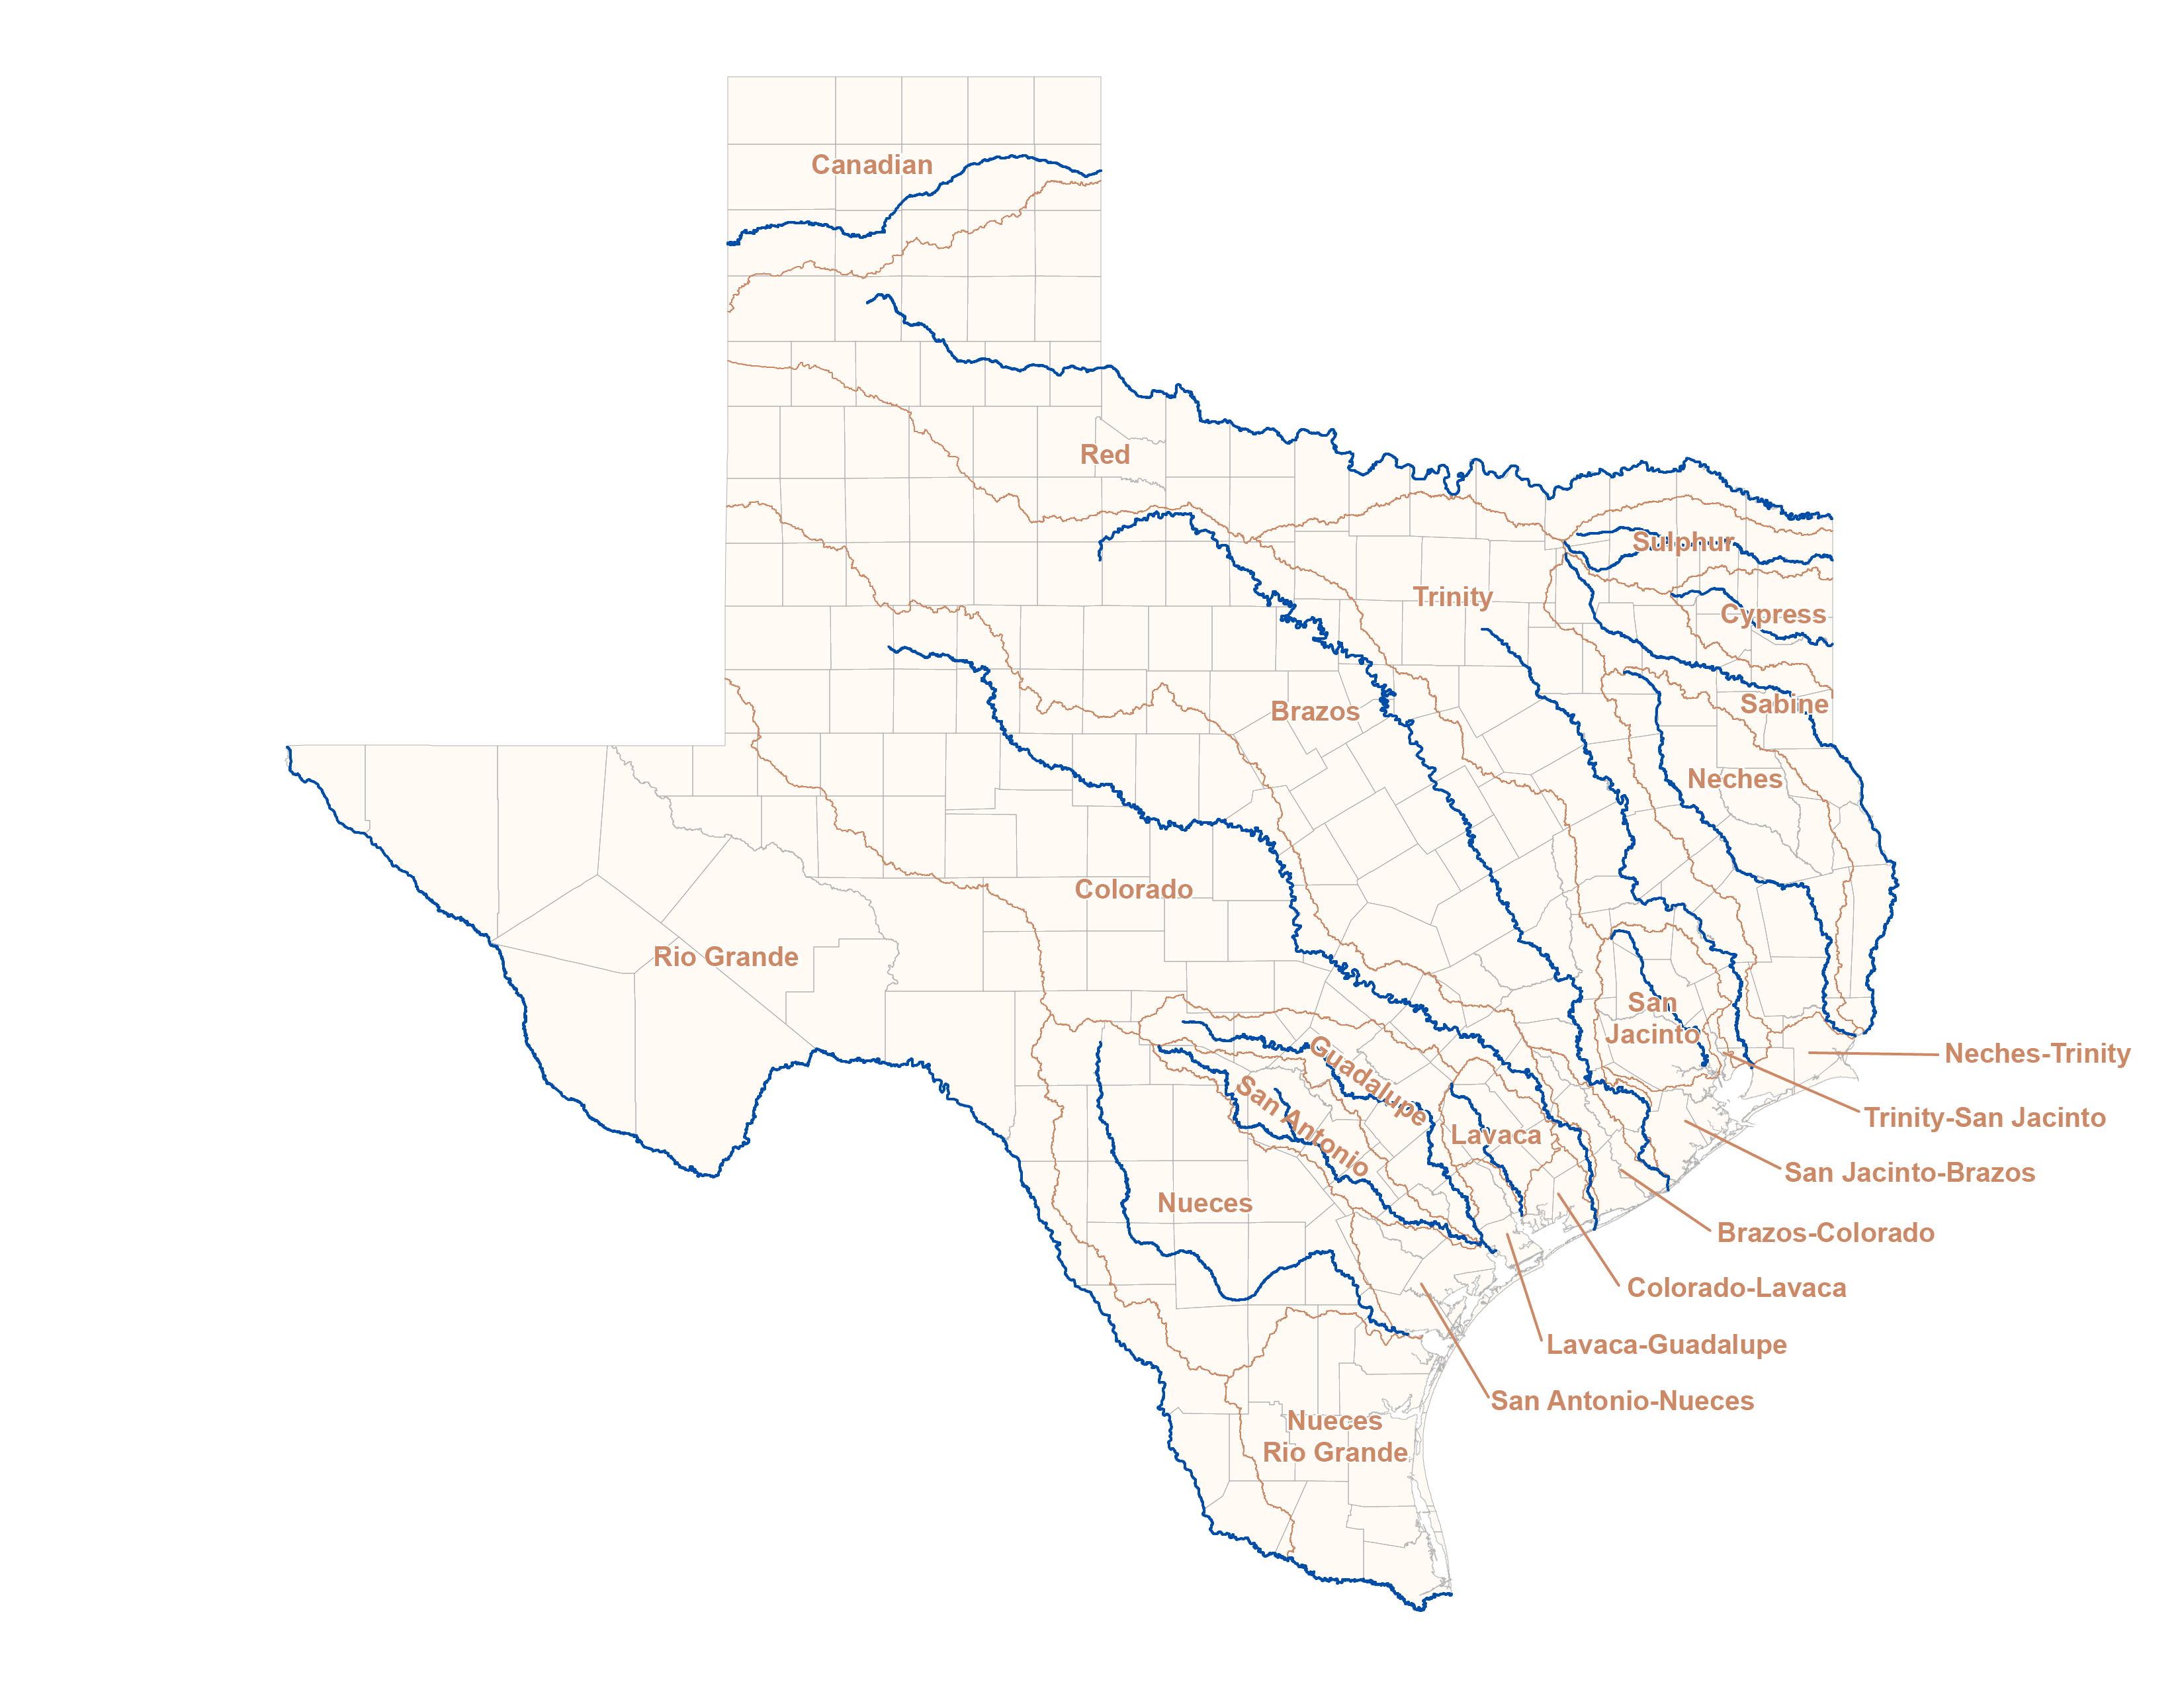 the major river basins in Texas is provided below. Click on the river 